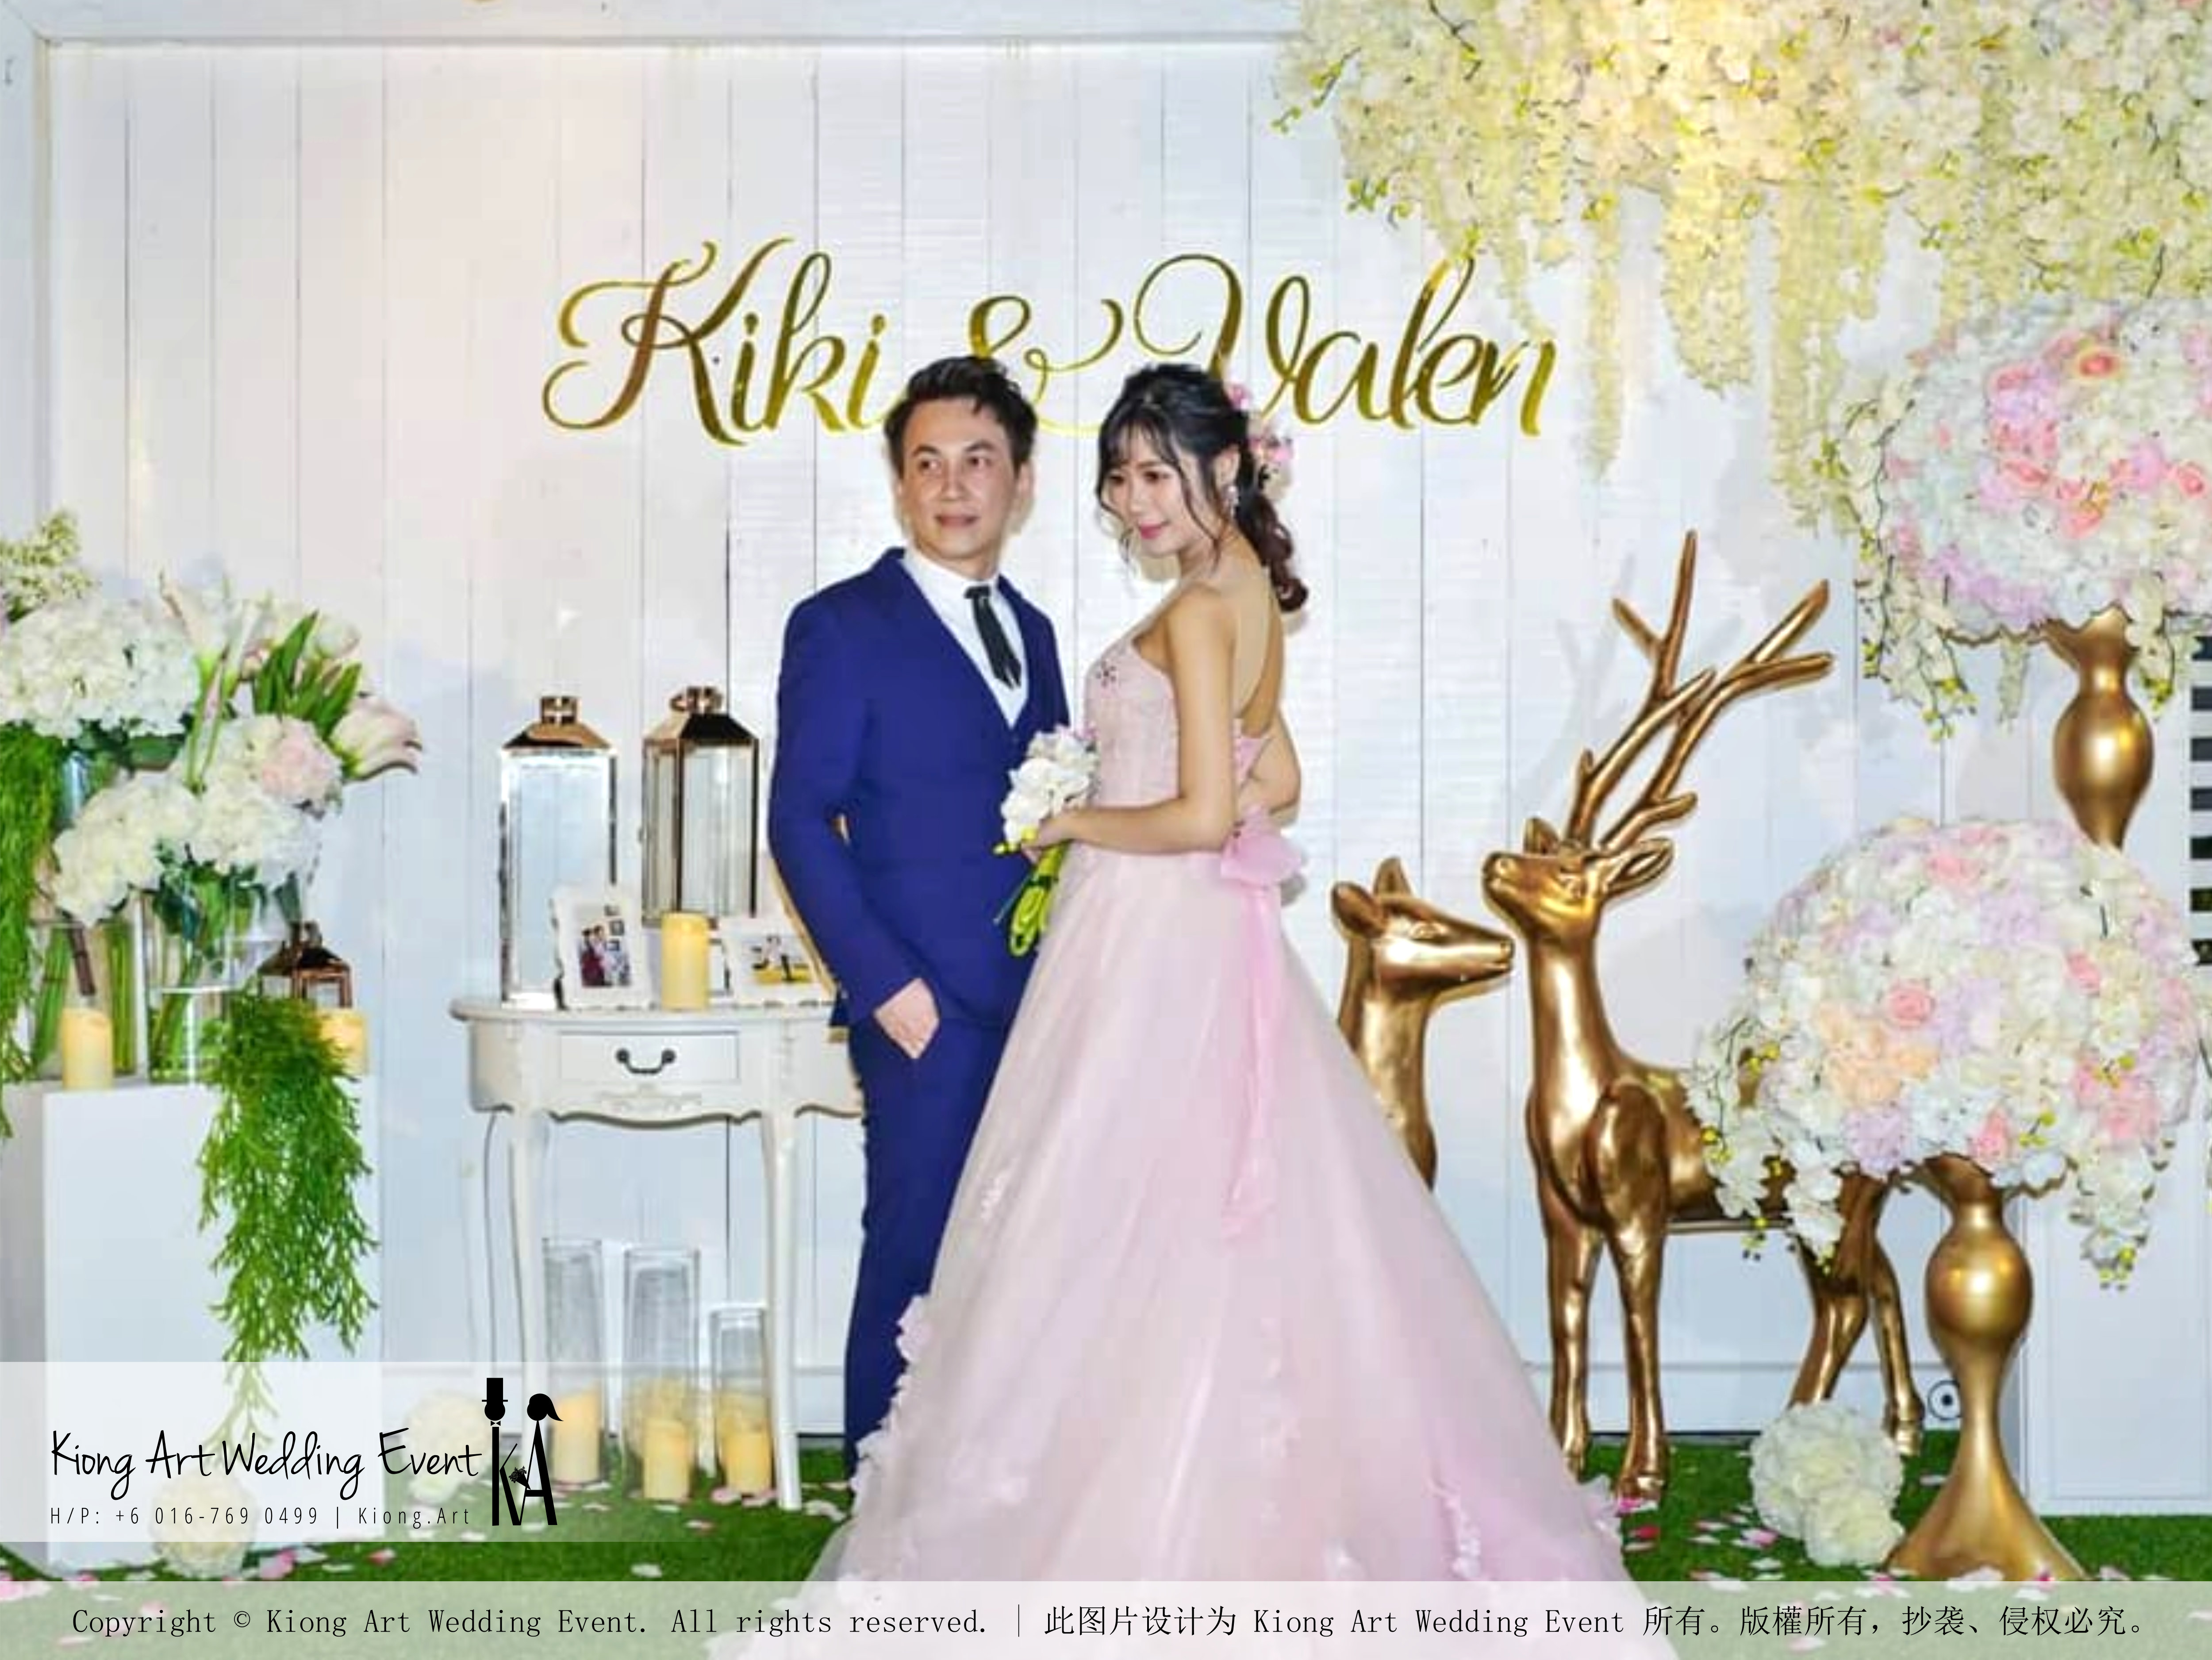 Kiong Art Wedding Event Kuala Lumpur Malaysia Wedding Decoration One-stop Wedding Planning Warm Outdoor Romantic Style Theme Kluang Container Swimming Pool Homestay A07-A01-56